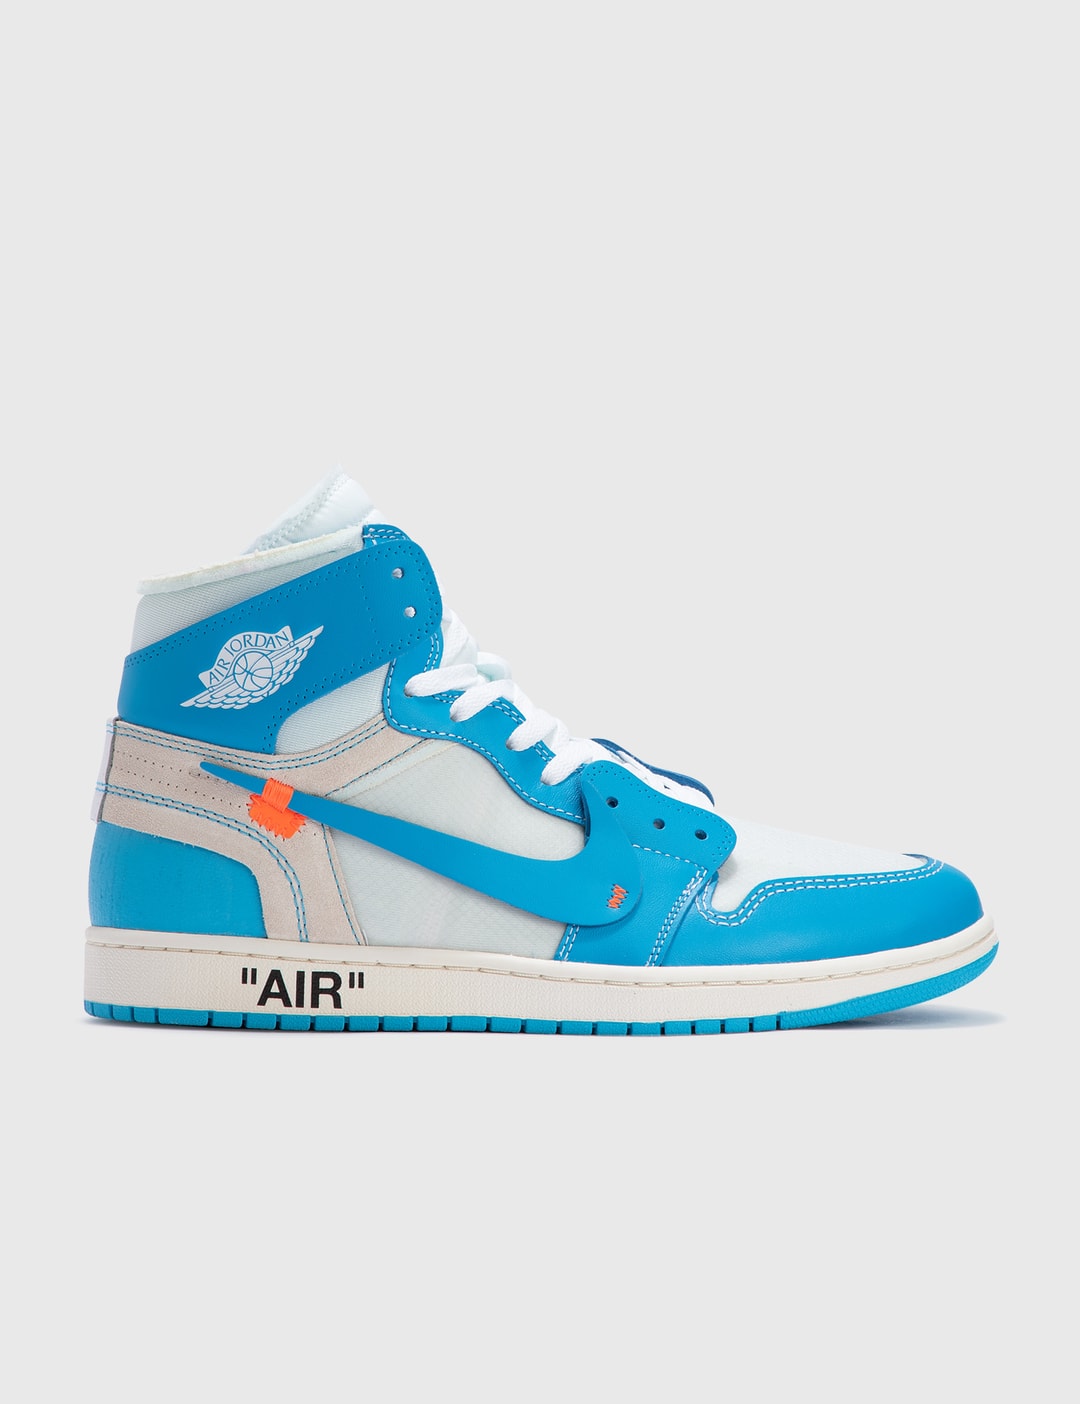 Briefcase Alice Anoi Jordan Brand - Off-White x Nike Air Jordan 1 NRG | HBX - Globally Curated  Fashion and Lifestyle by Hypebeast